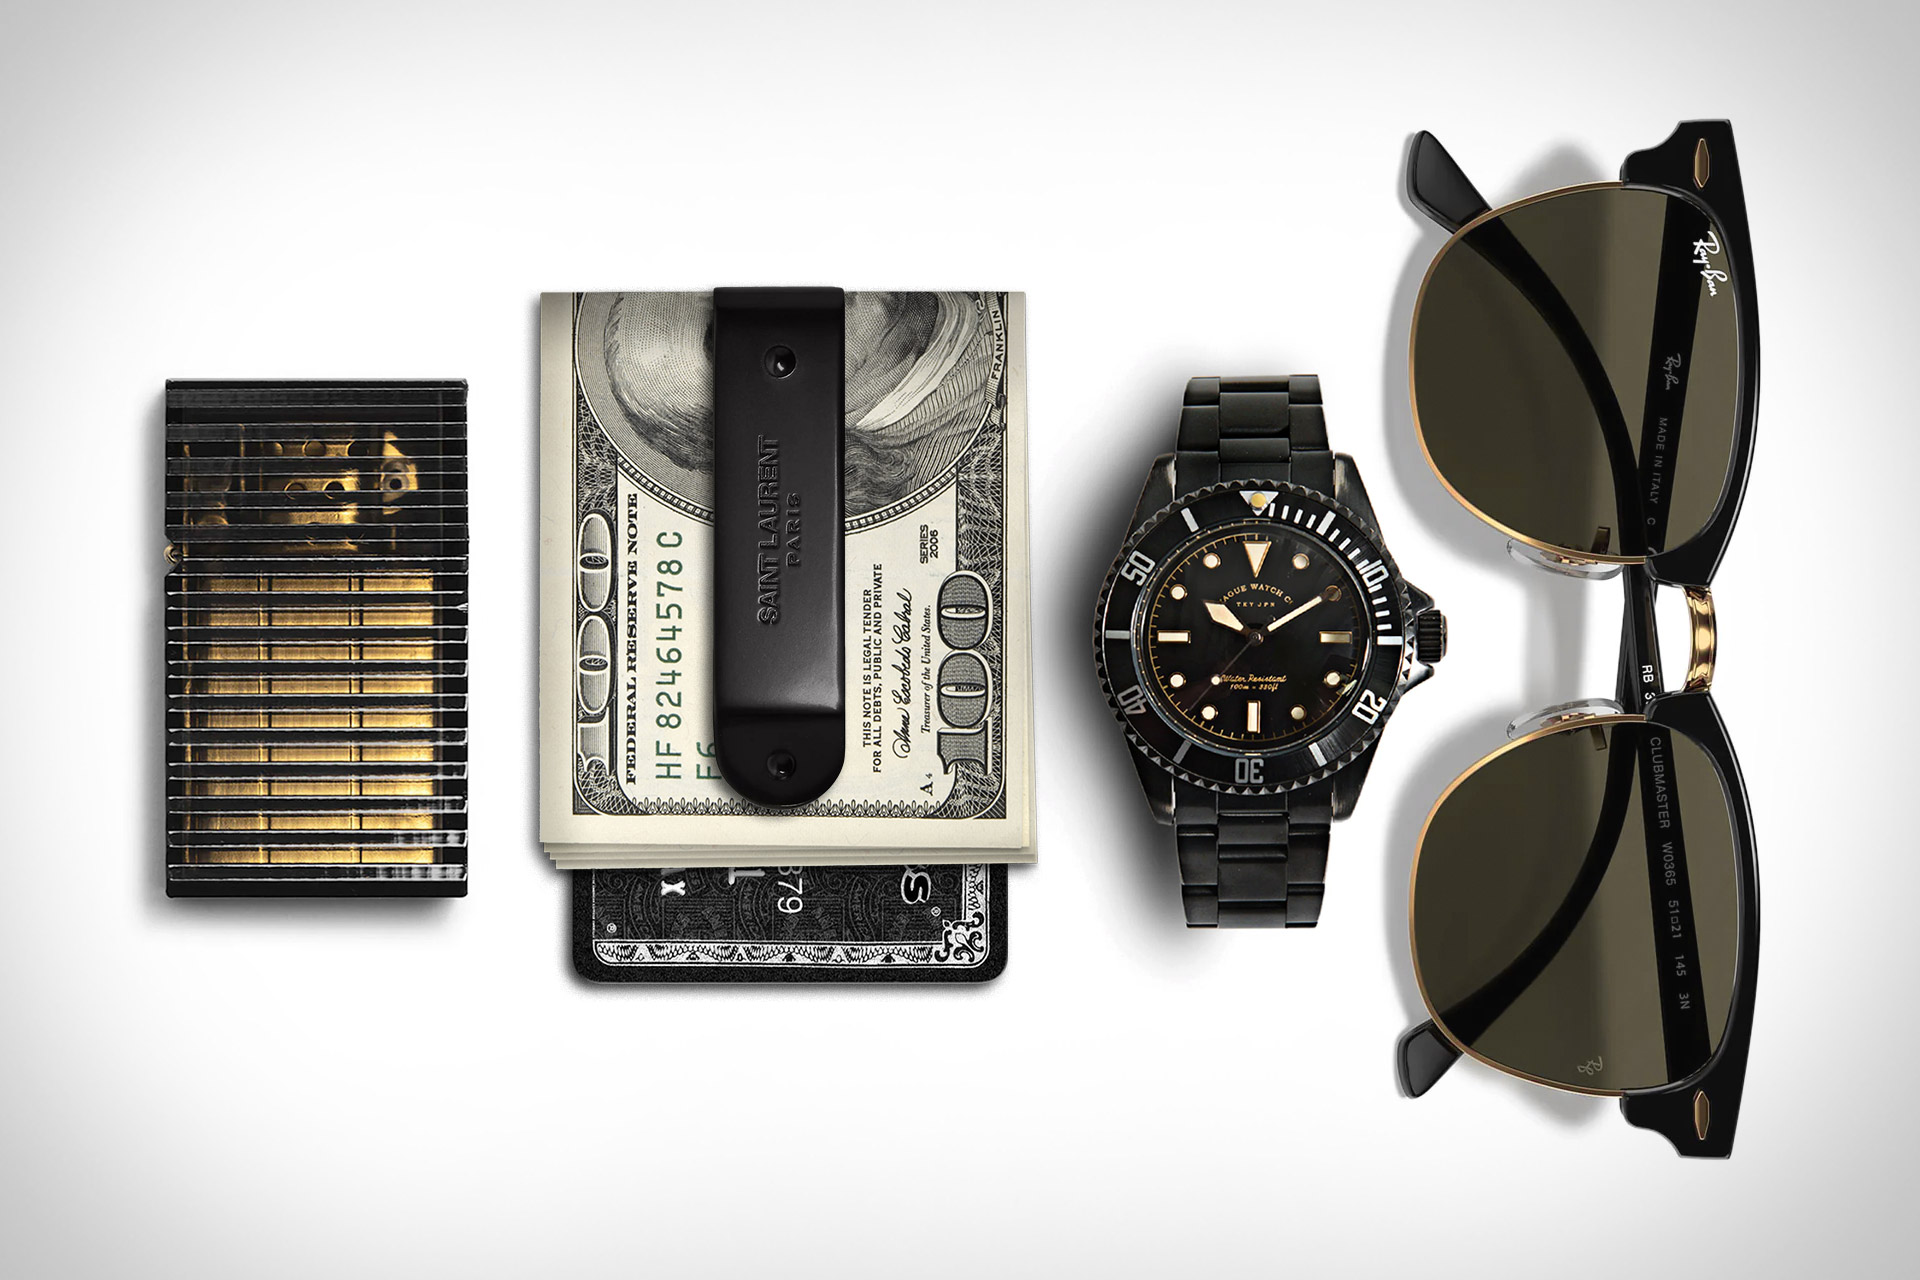 Everyday Carry: Clubmaster | Uncrate, #Everyday #Carry #Clubmaster #Uncrate